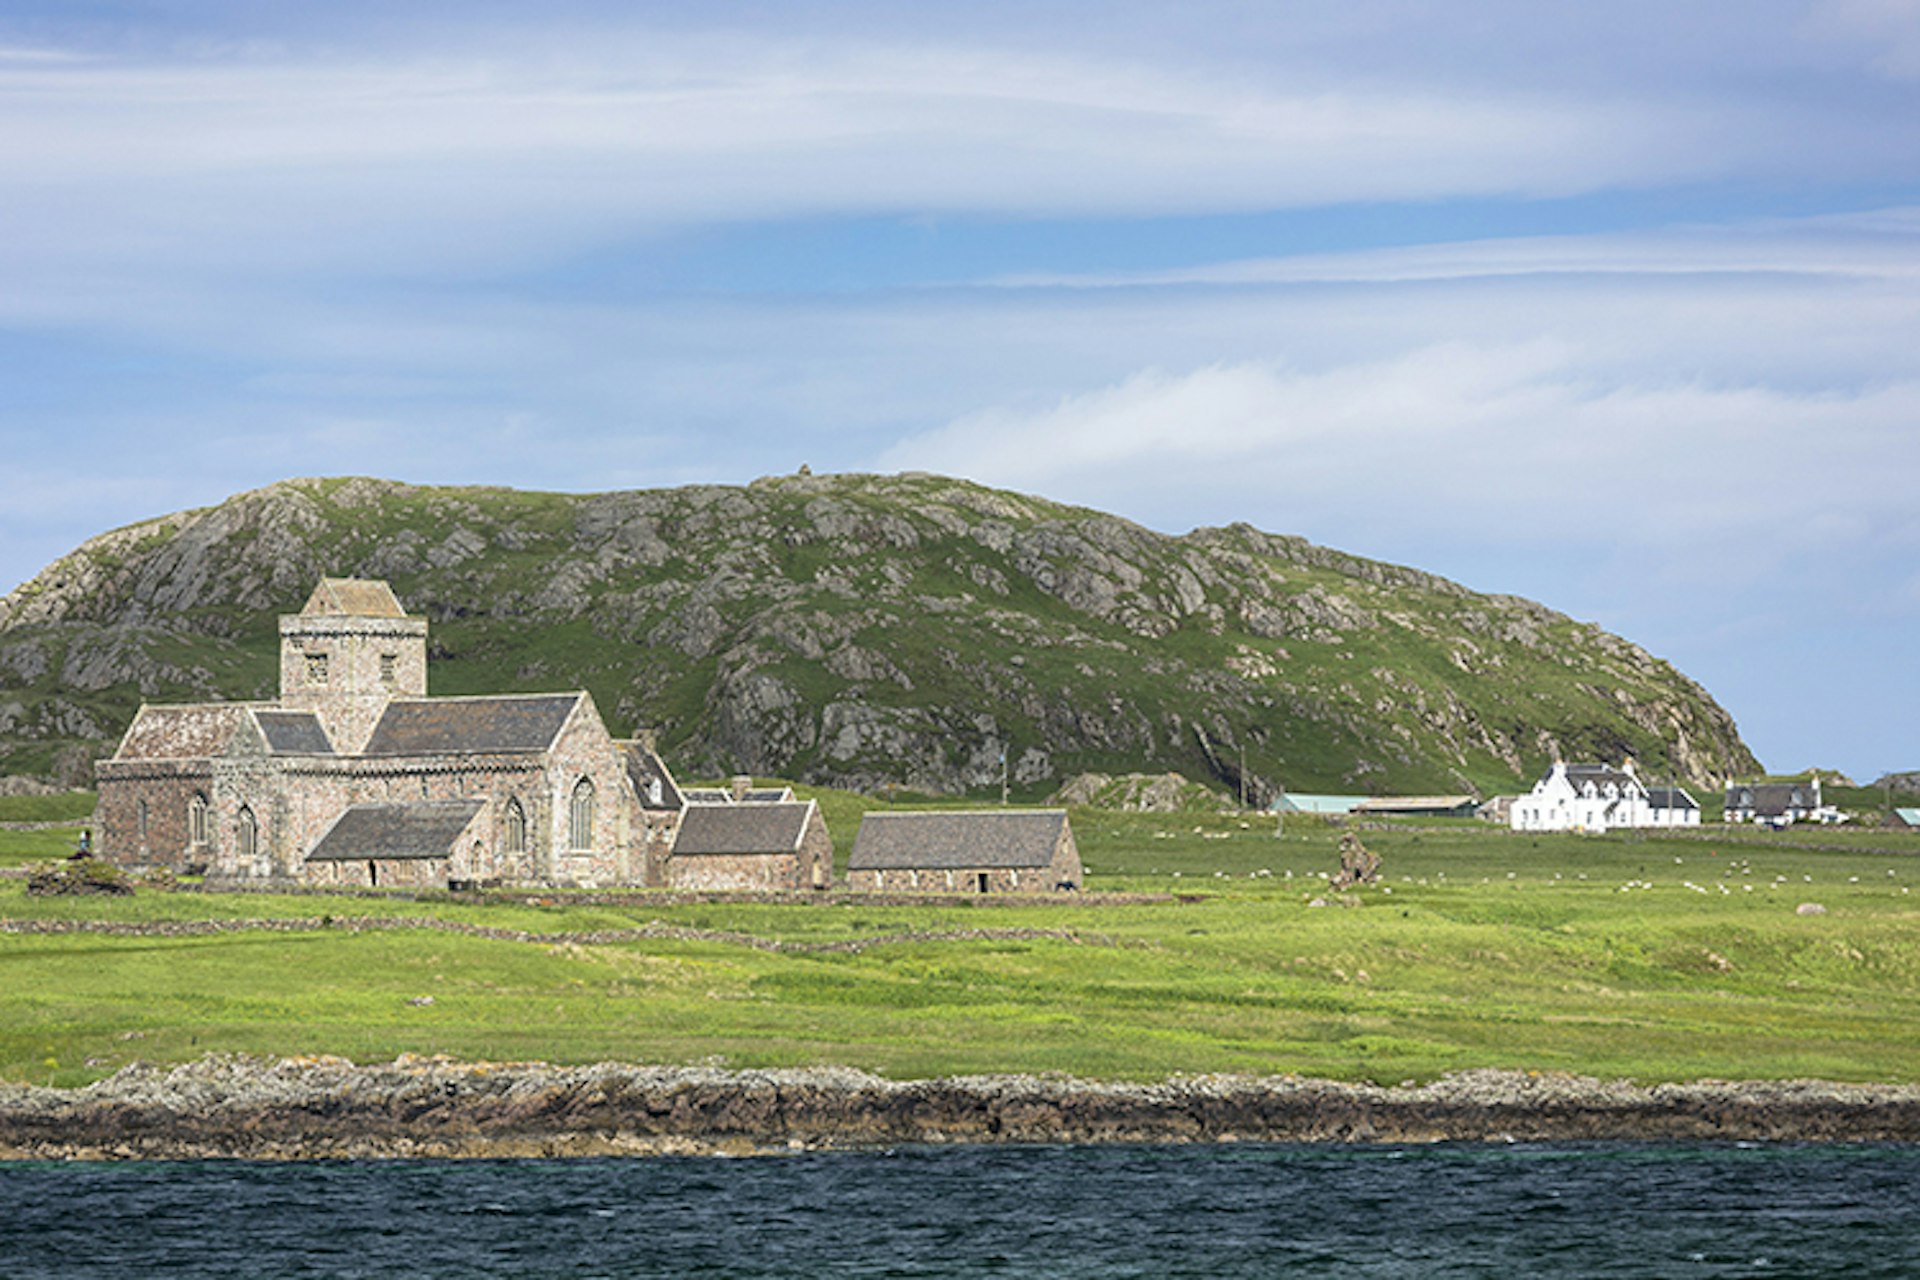 The secluded Iona Abbey in Scotland.